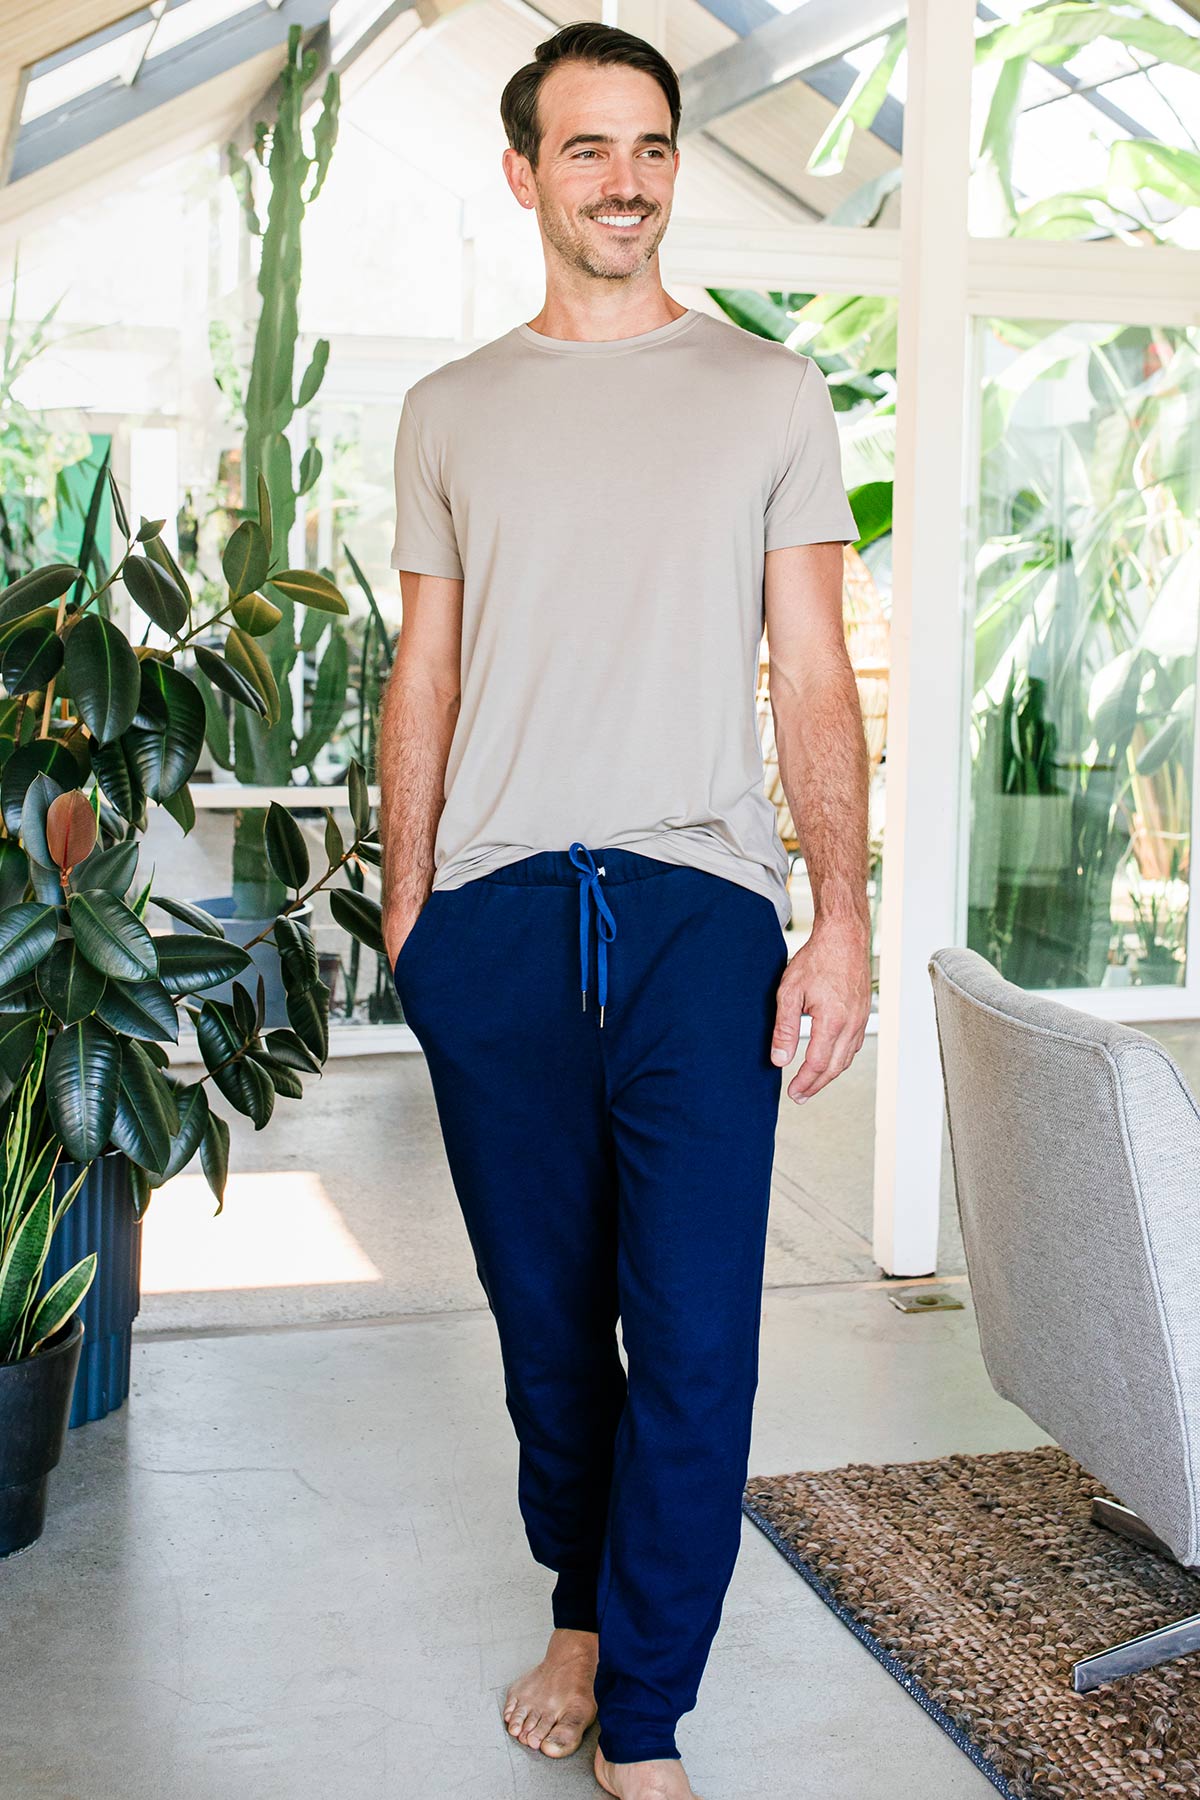 A man striding forward and smiling with one hand in his pocket, wearing Yala Men's Zach Bamboo & Organic Cotton Sweatshirt Jogger Lounge Pant in Navy